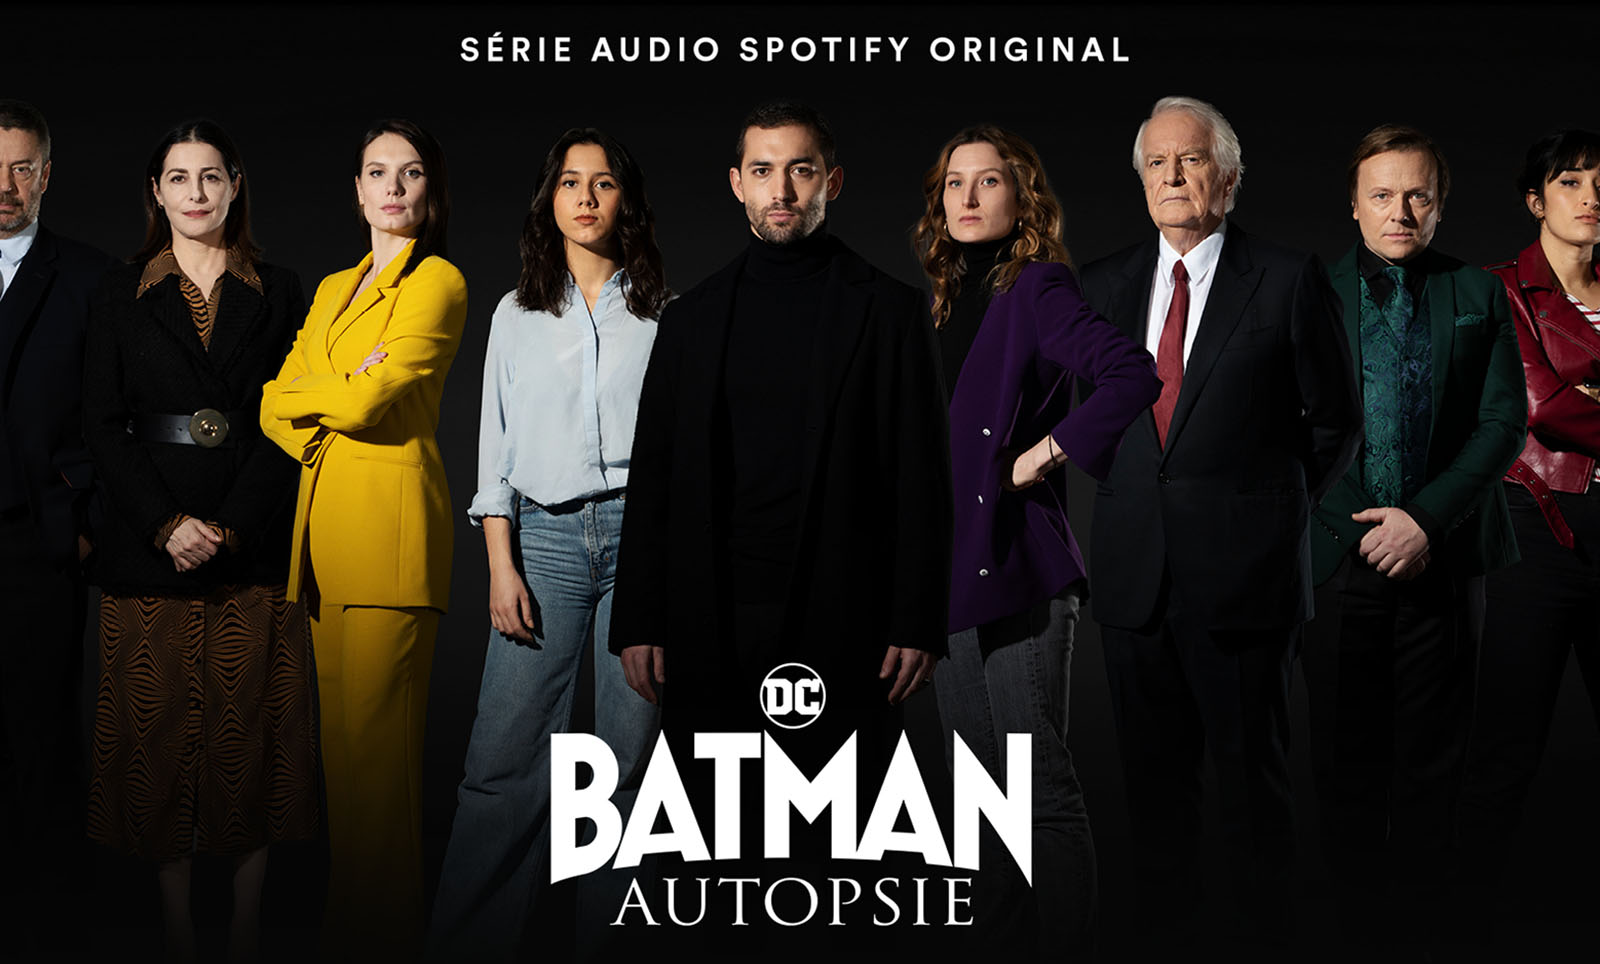 With ‘Batman Autopsy’ Spotify takes off to conquer new podcast listeners